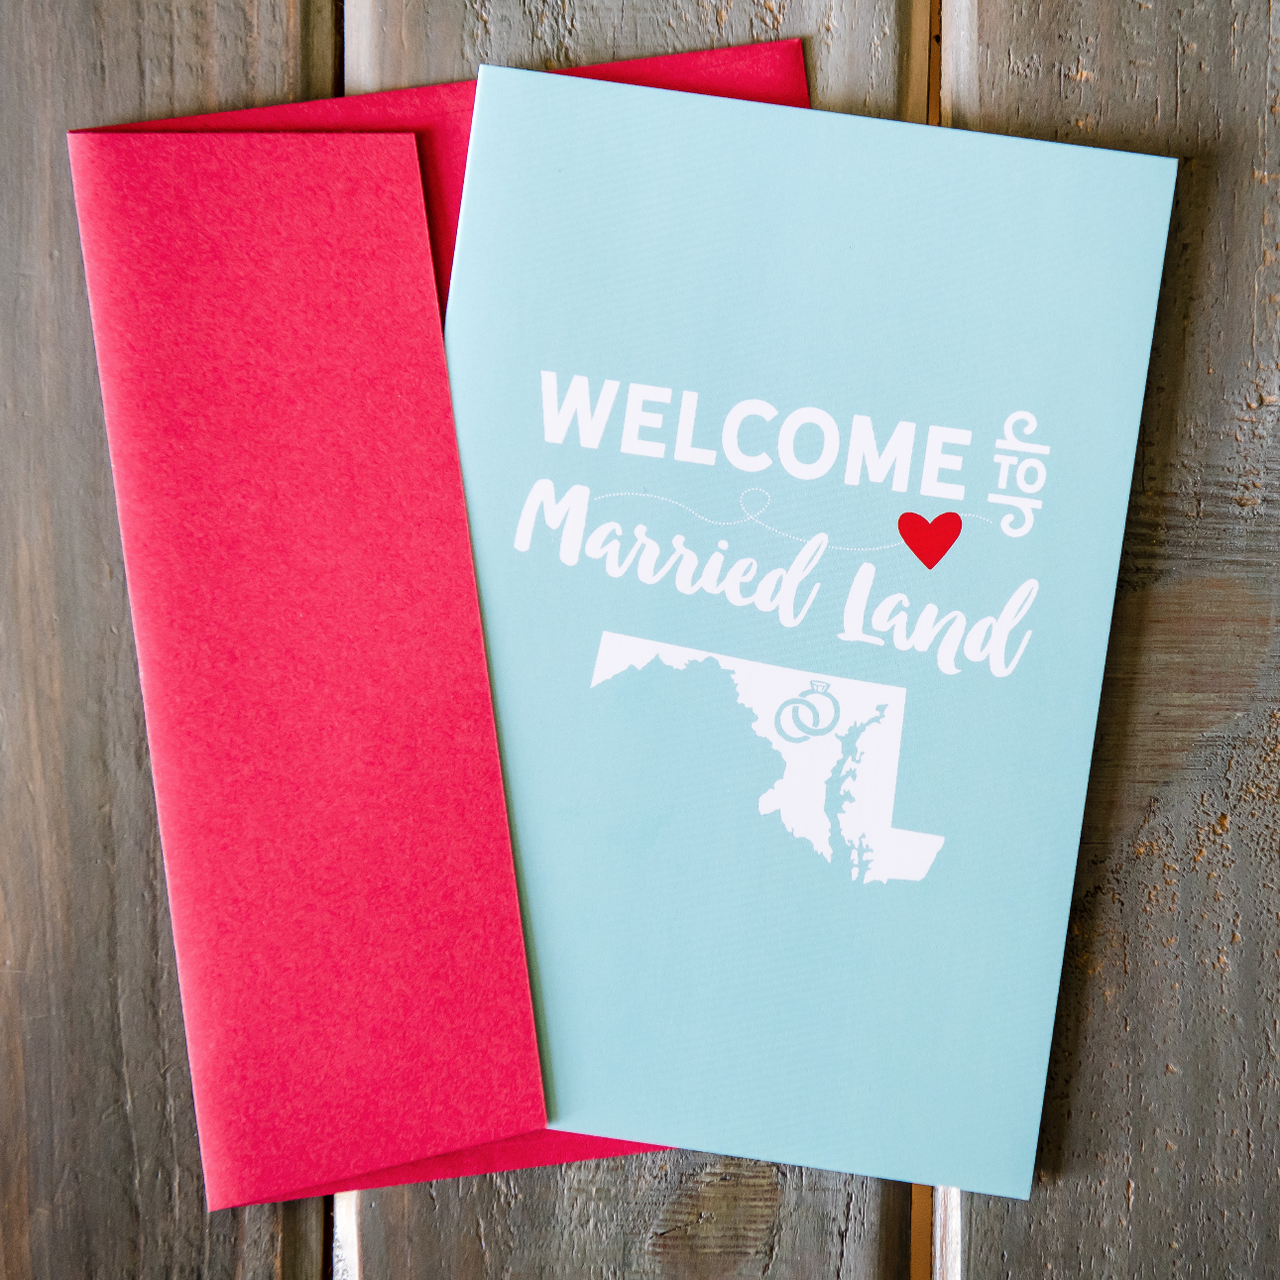 Married Land - Greeting Card